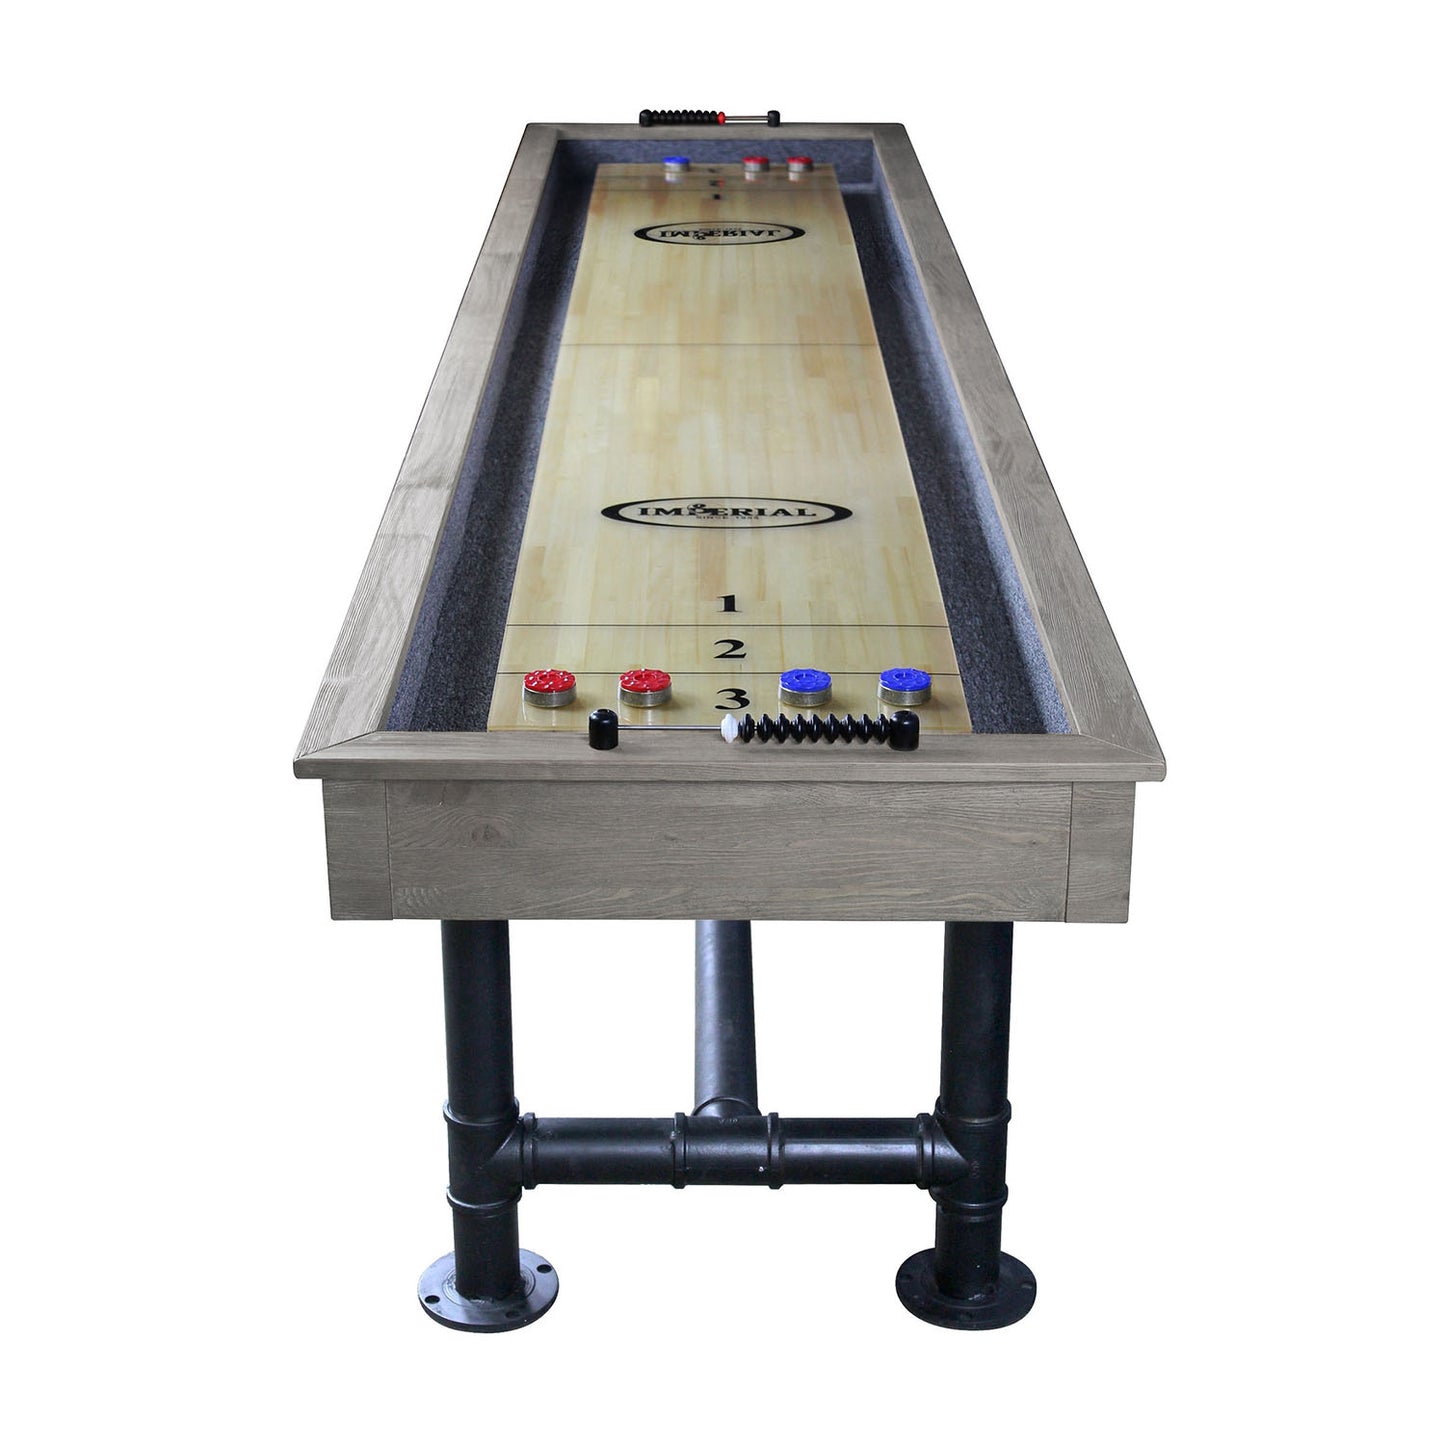 Imperial Bedford 12ft Shuffleboard Table in Silver Mist - Gaming Blaze